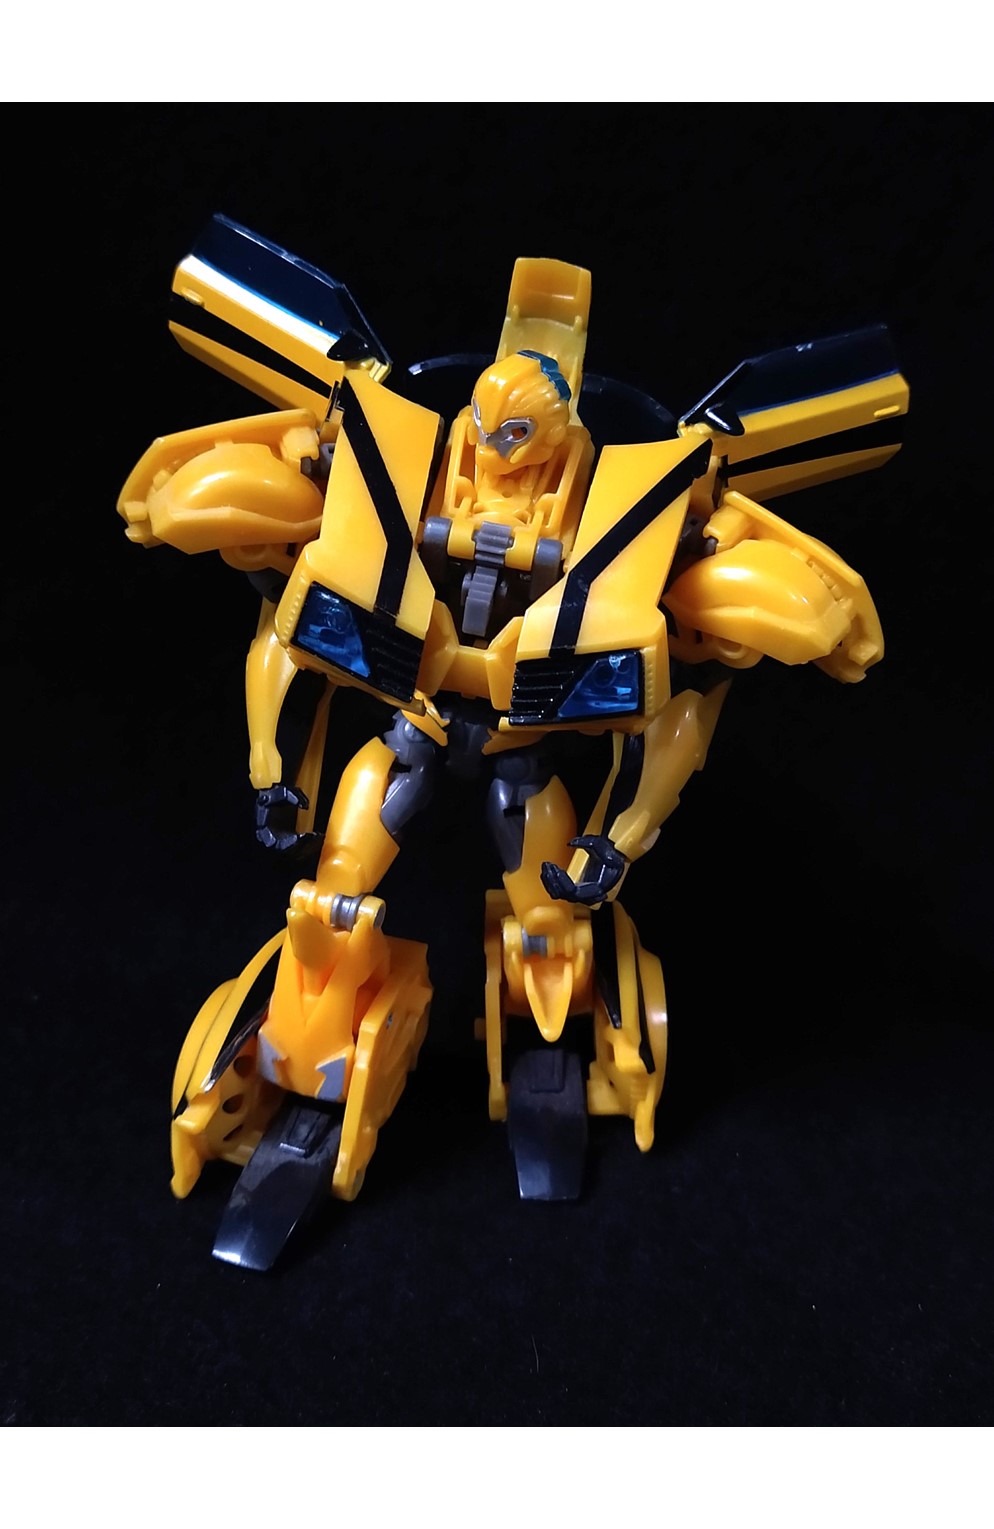 Transformers 2012 Robots In Disguise Bumblebee